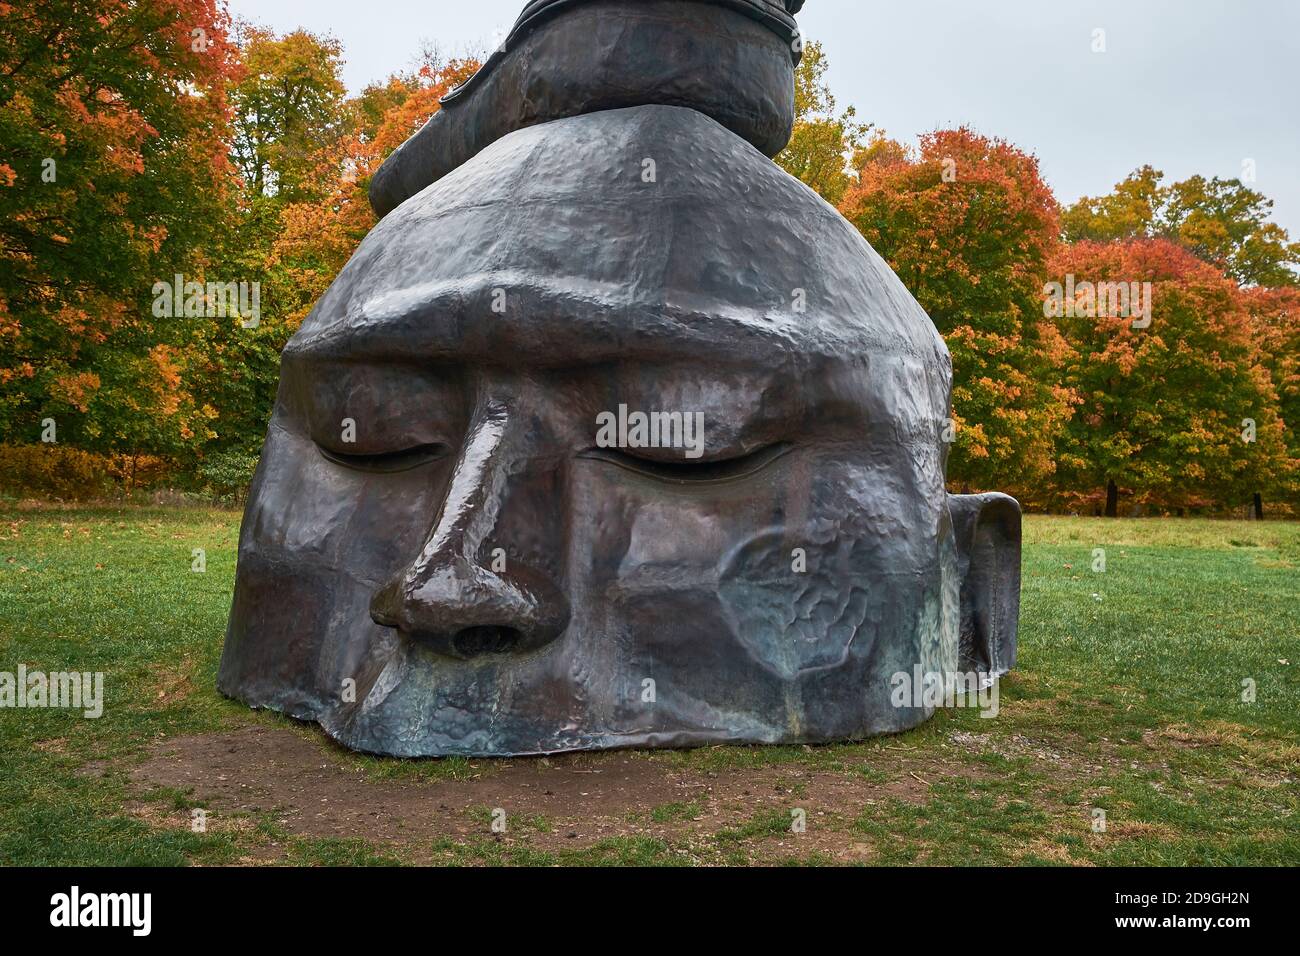 A closeup of the head in Zhang Huan's Three Legged Buddha sculpture. During autumn, peak fall color at Storm King Art Center in New York. Stock Photo